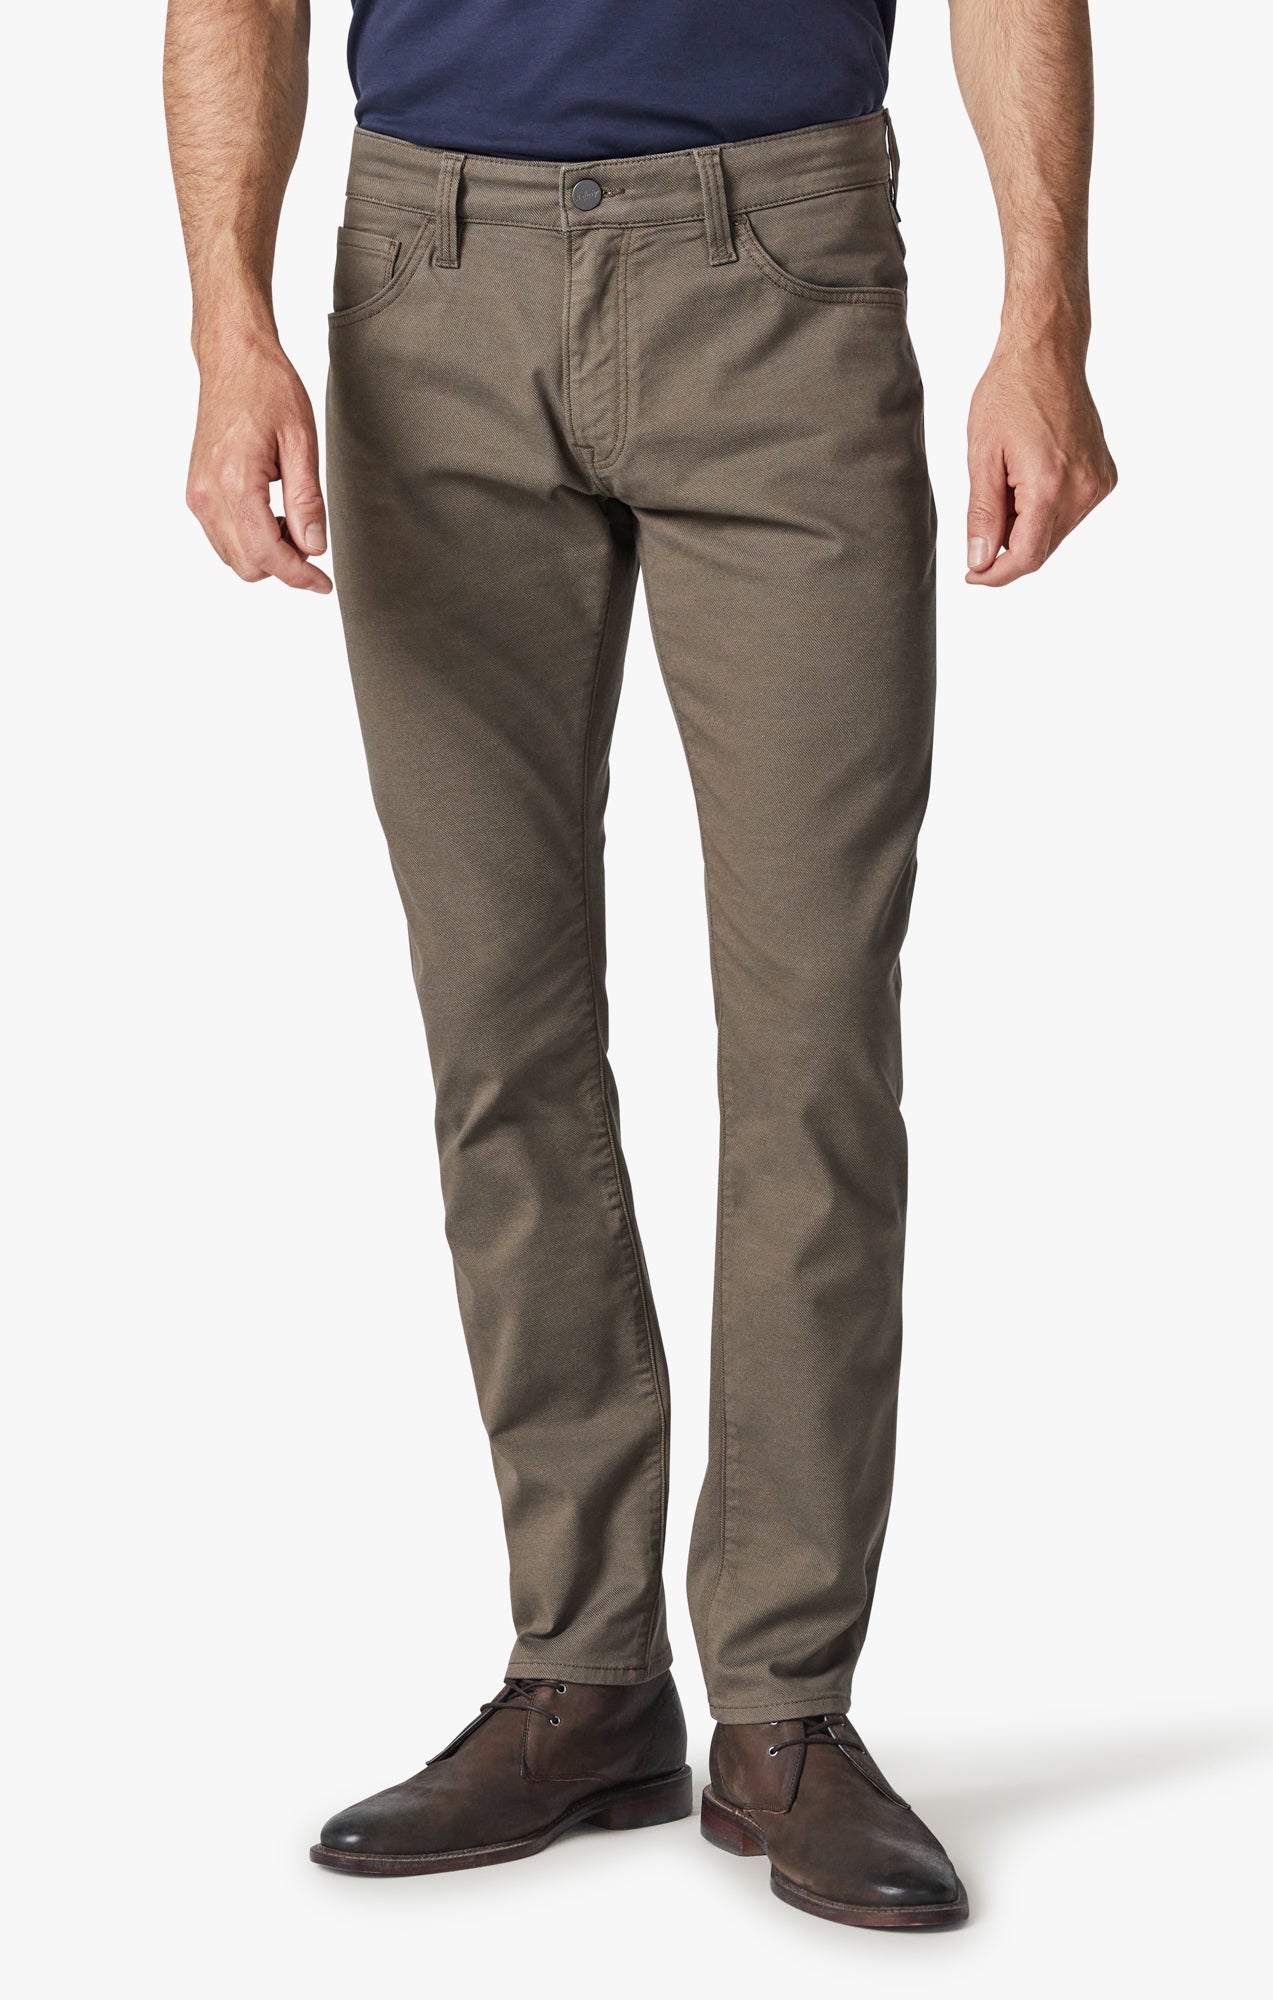 Courage Straight Leg Pants in Canteen Coolmax – 34 Heritage